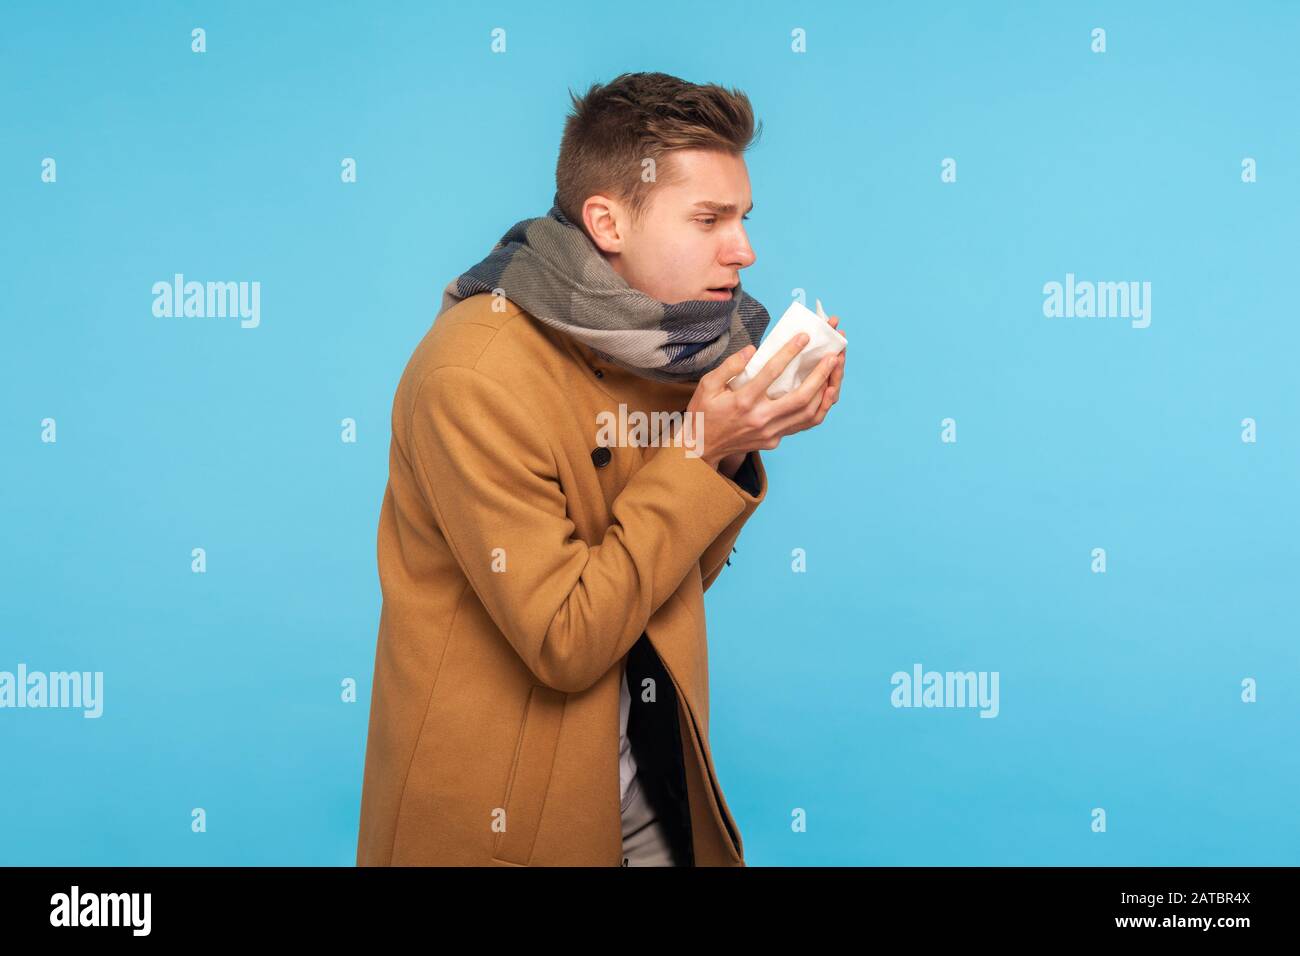 Influenza season. Portrait of flu-sick man in autumn coat and scarf sneezing in napkin, feeling unwell with runny nose, caught cold or allergy symptom Stock Photo